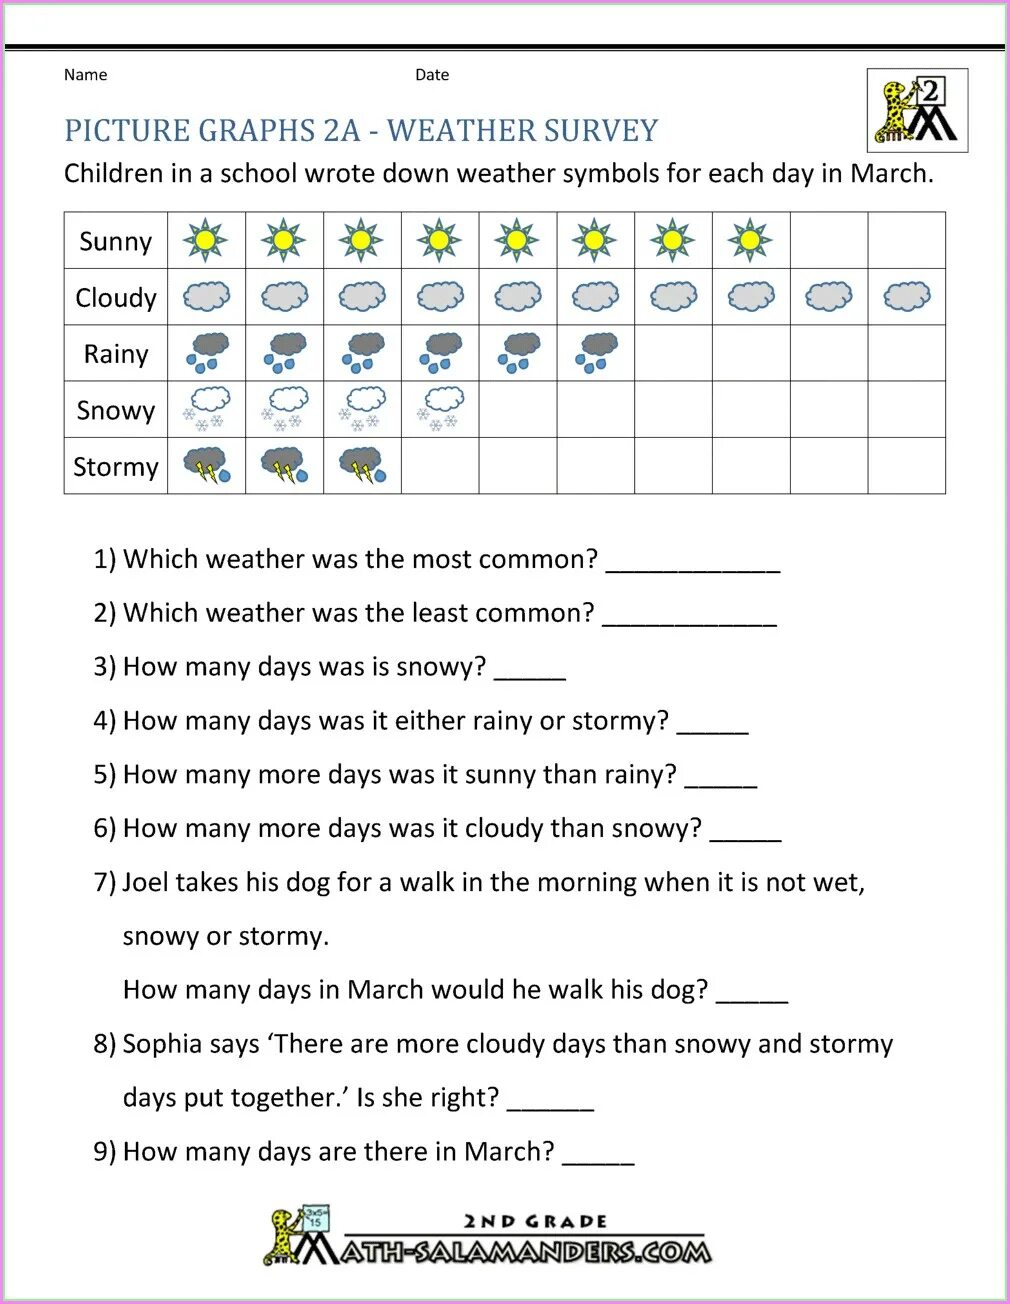 Weather statements. Weather Worksheets for Kids 4 класс. Worksheet weather 4 класс. Worksheets погода 2 класс. Weather 2 класс Worksheet.